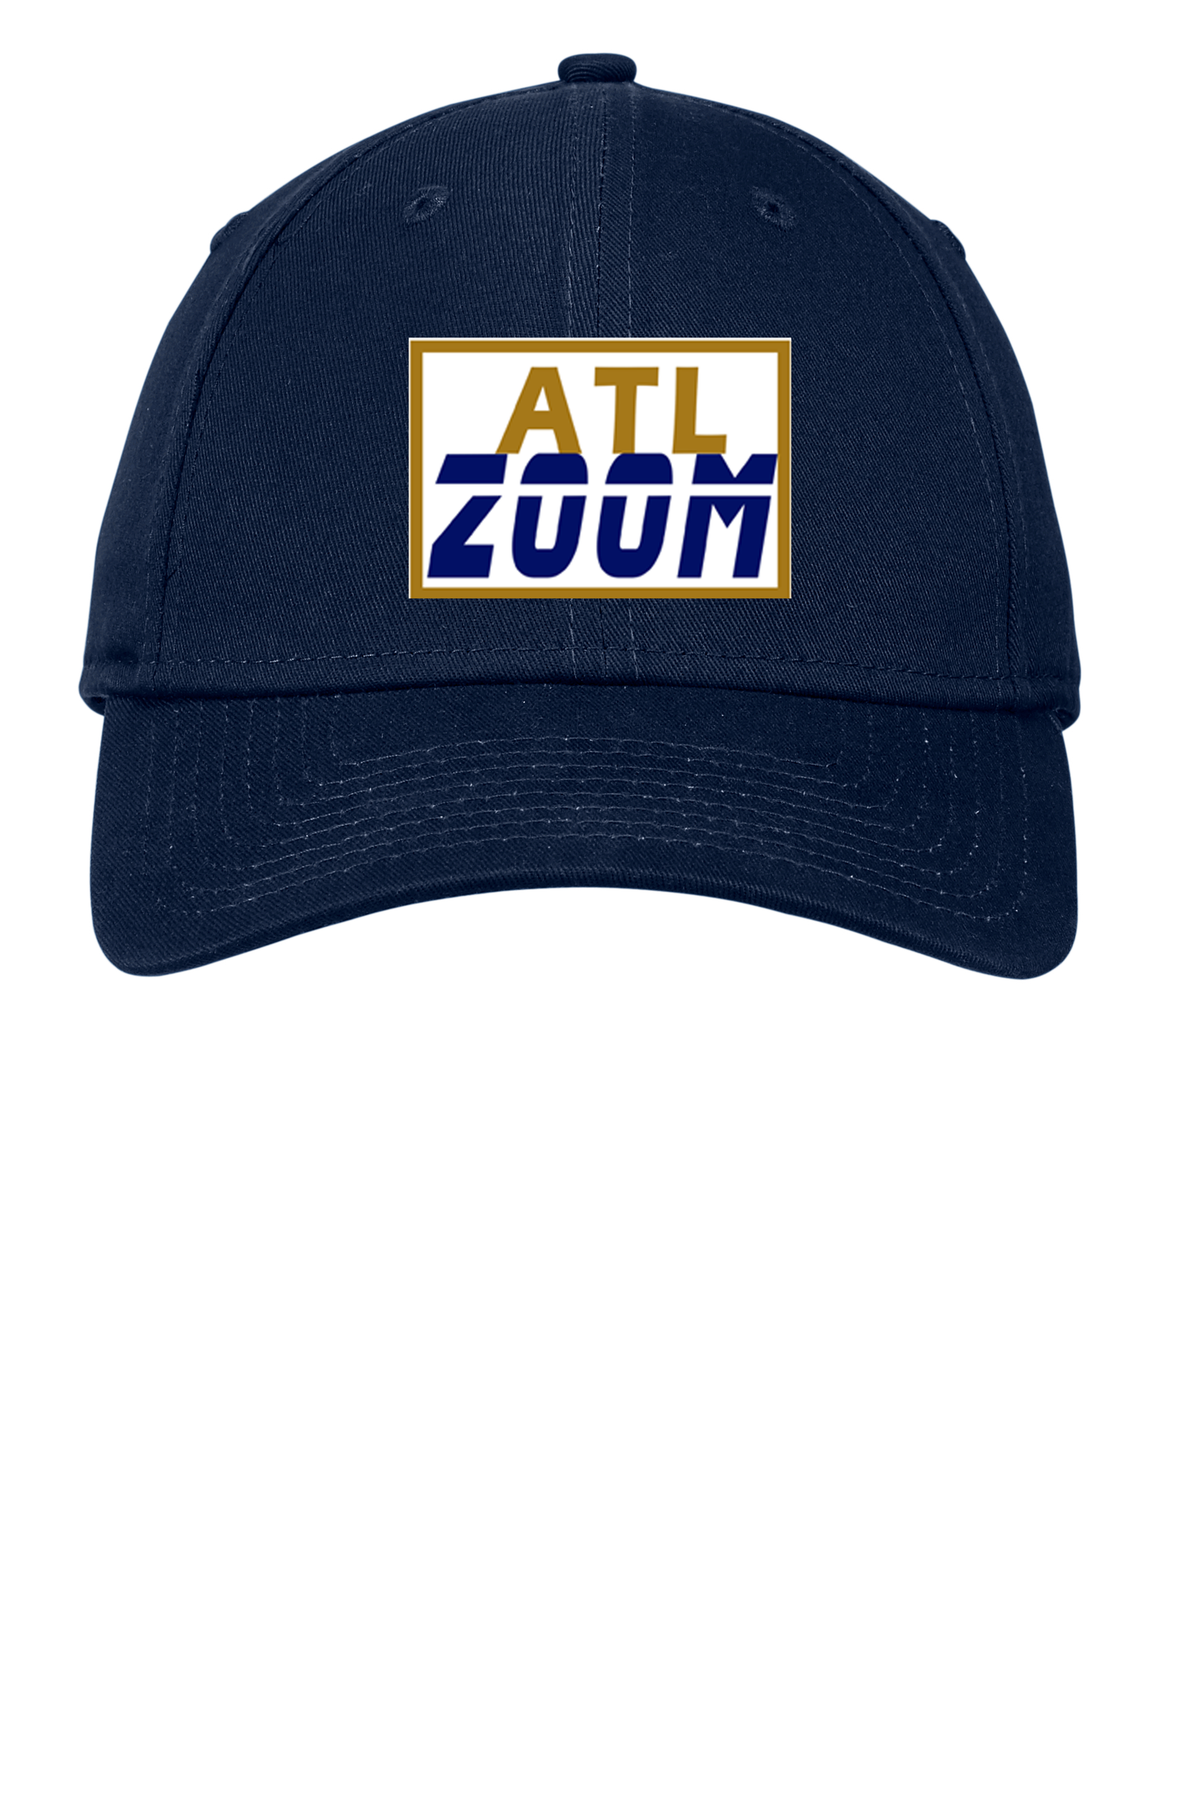 Snap Back Hat_ ATL ZOOM Fair Shade Navy Blue Patch 